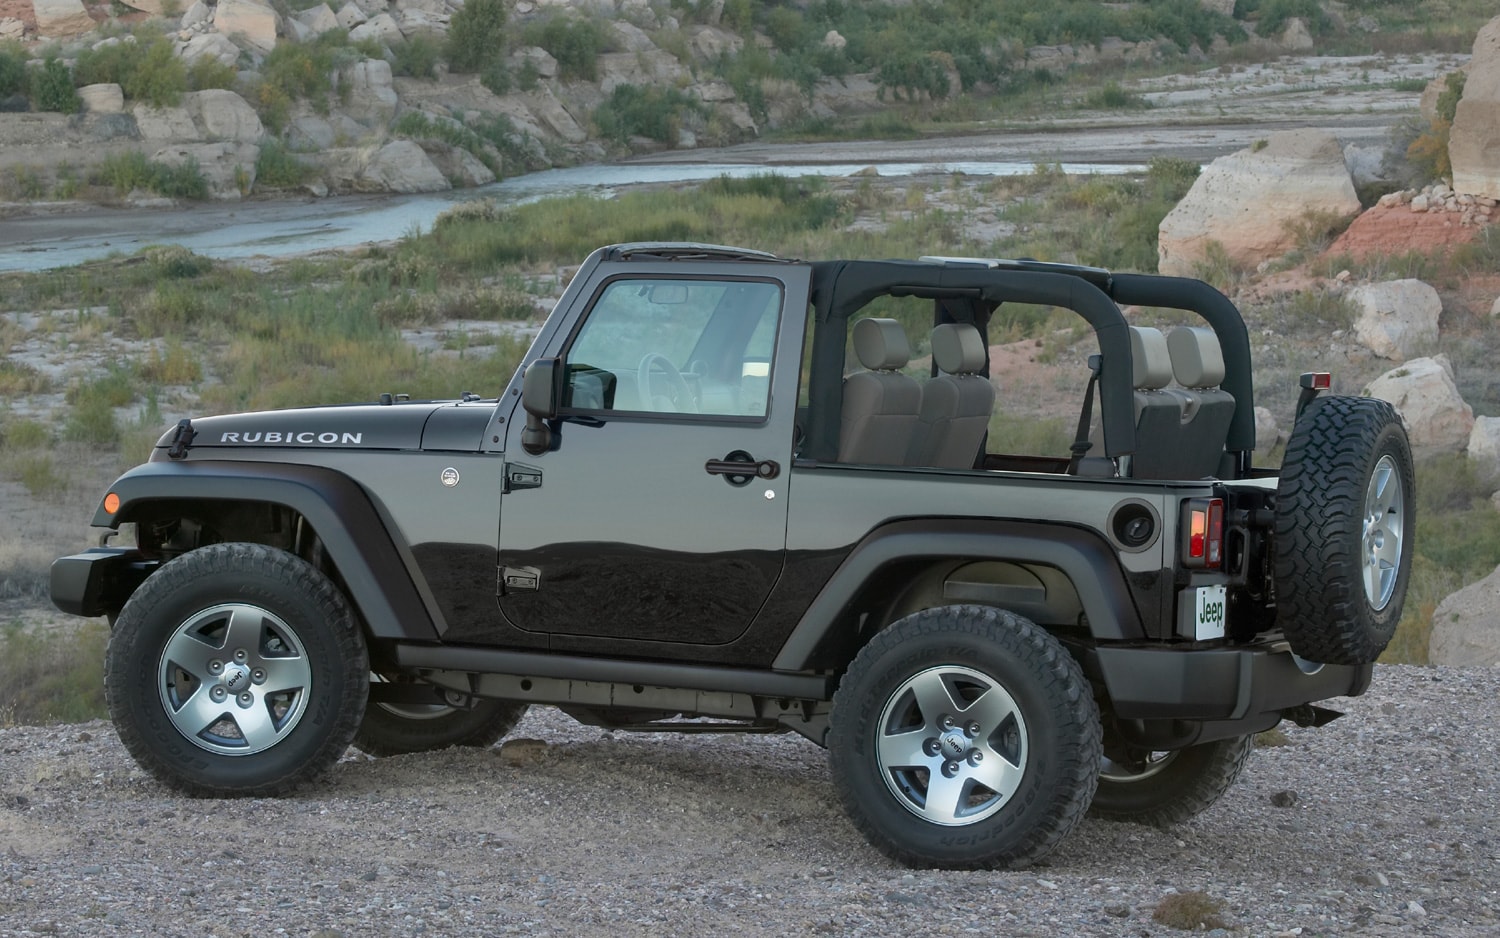 Recalled: 2010 Jeep Wrangler Skid Plate May Cause Fires